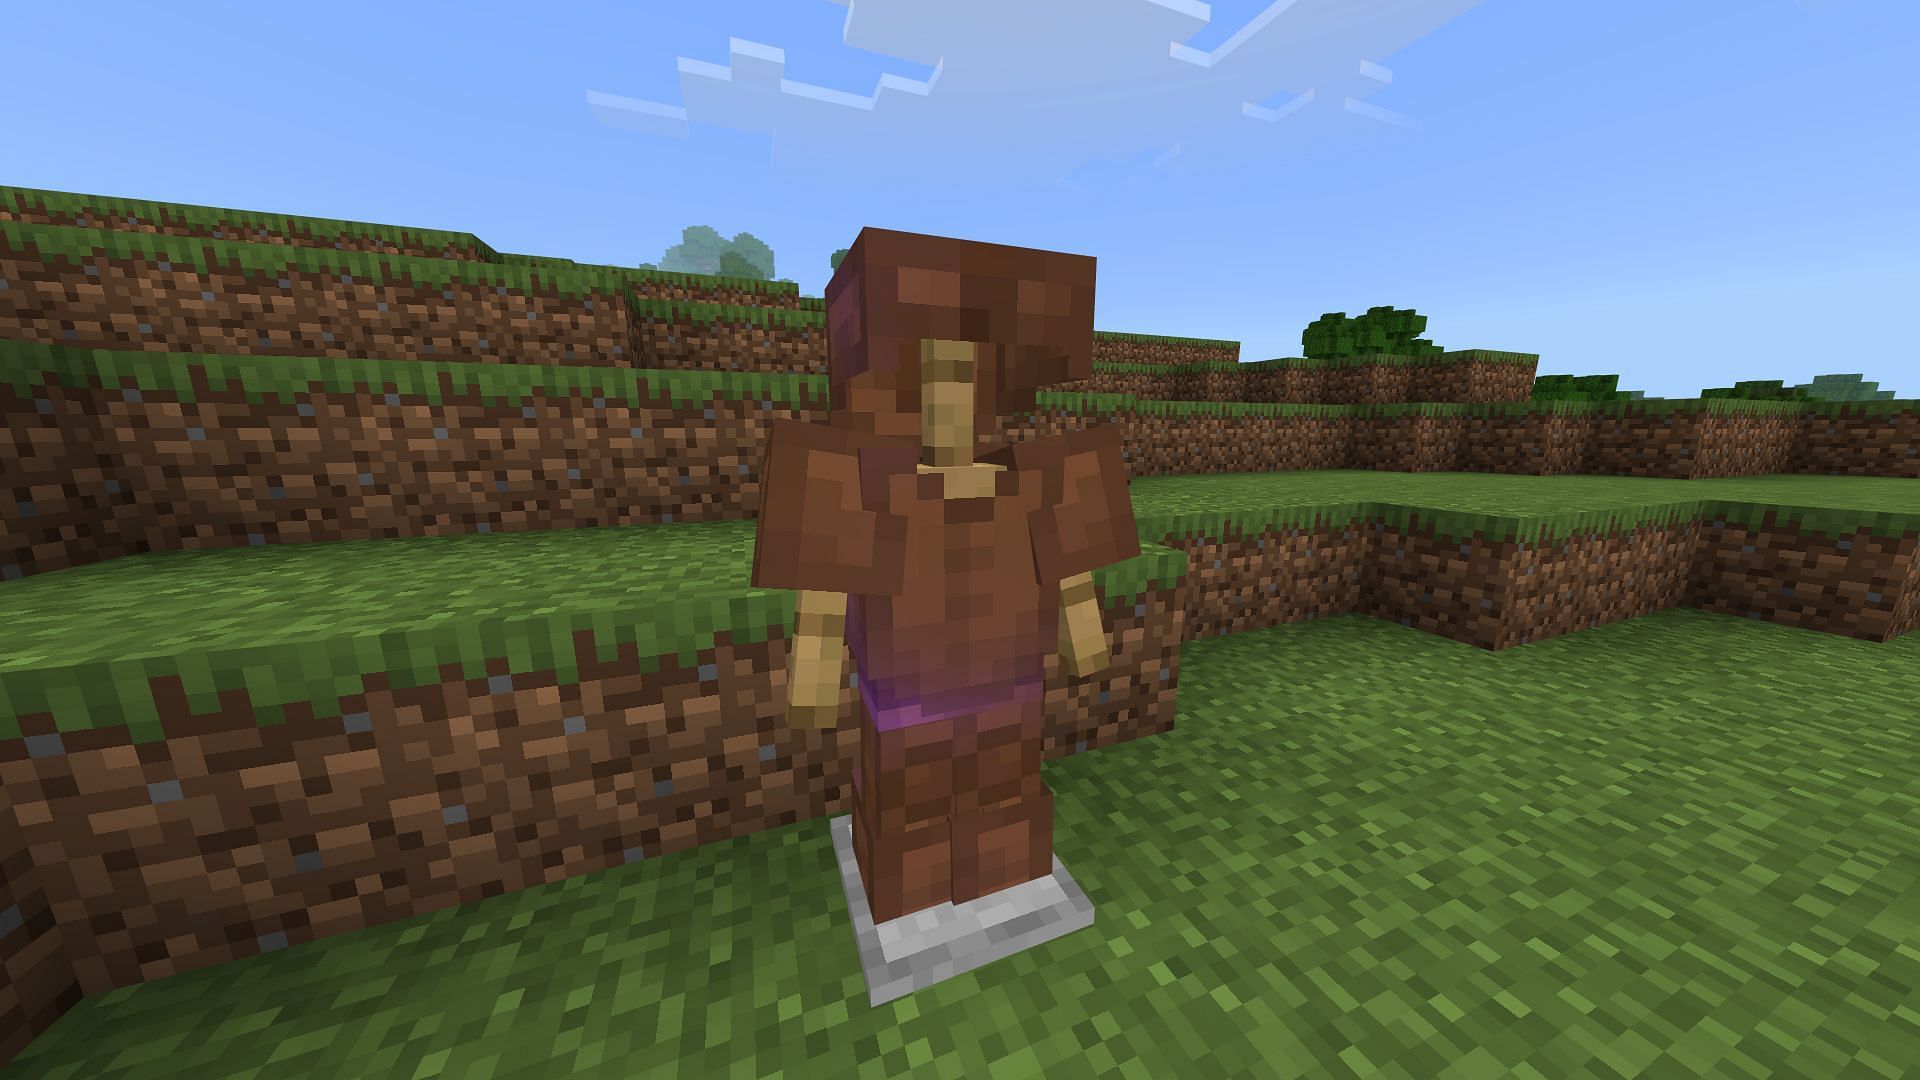 Minecraft Redditor finds extremely rare glitched armor set (Image via Mojang Studios)